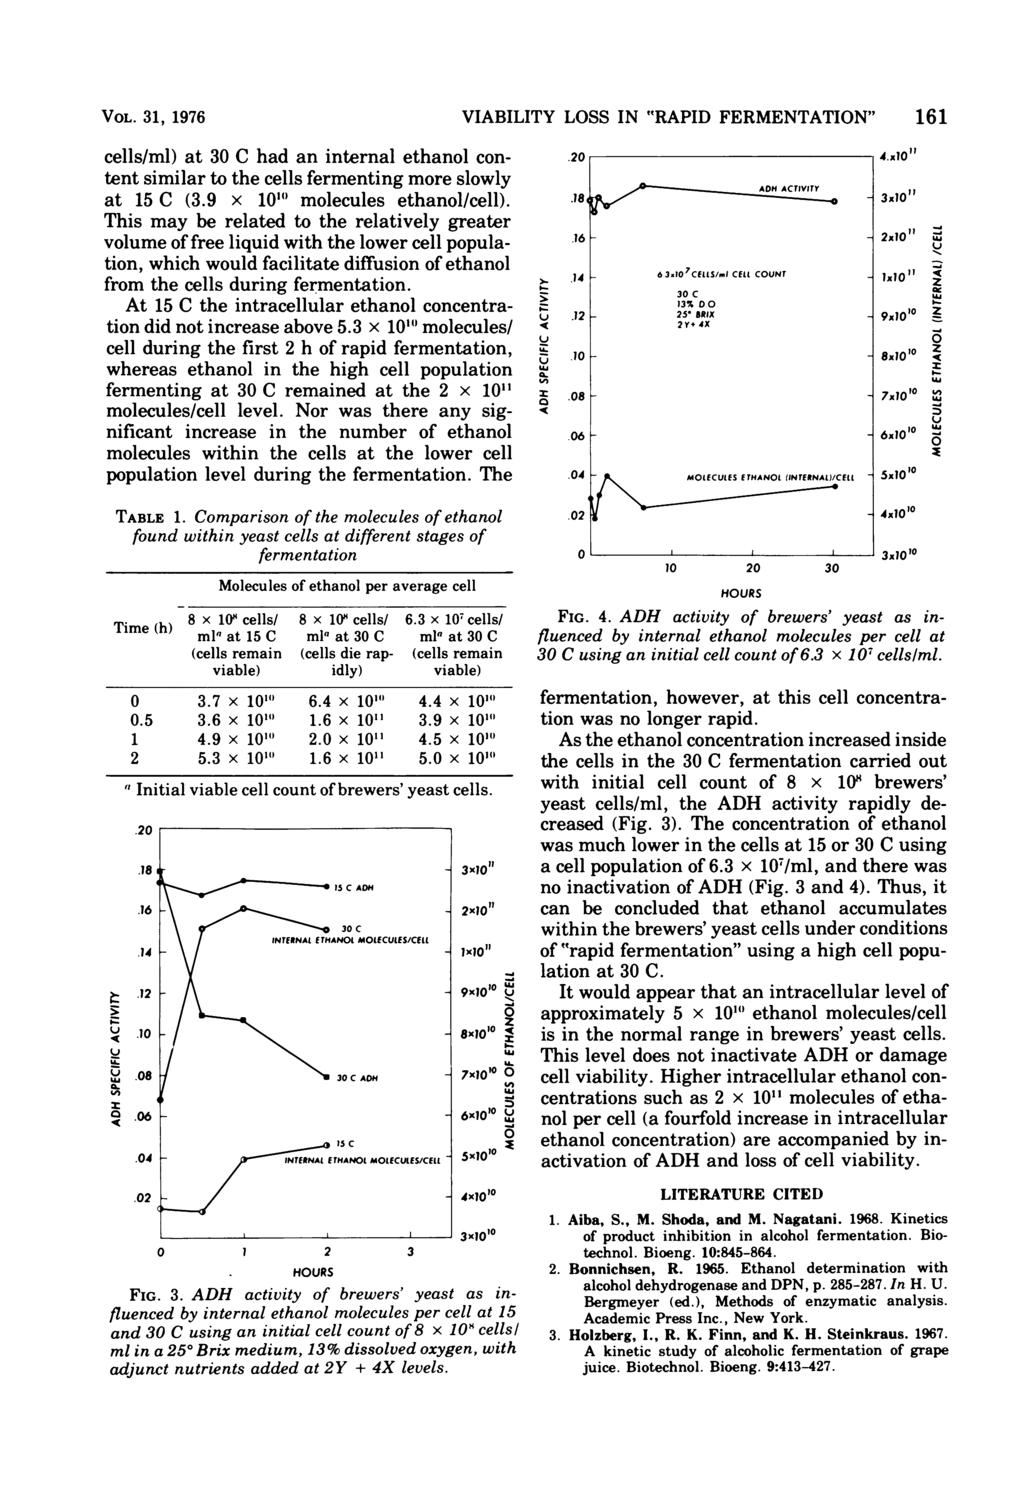 VOL. 31, 1976 cells/ml) at 30 C had an internal ethanol content similar to the cells fermenting more slowly at 15 C (3.9 x 101' molecules ethanol/cell).